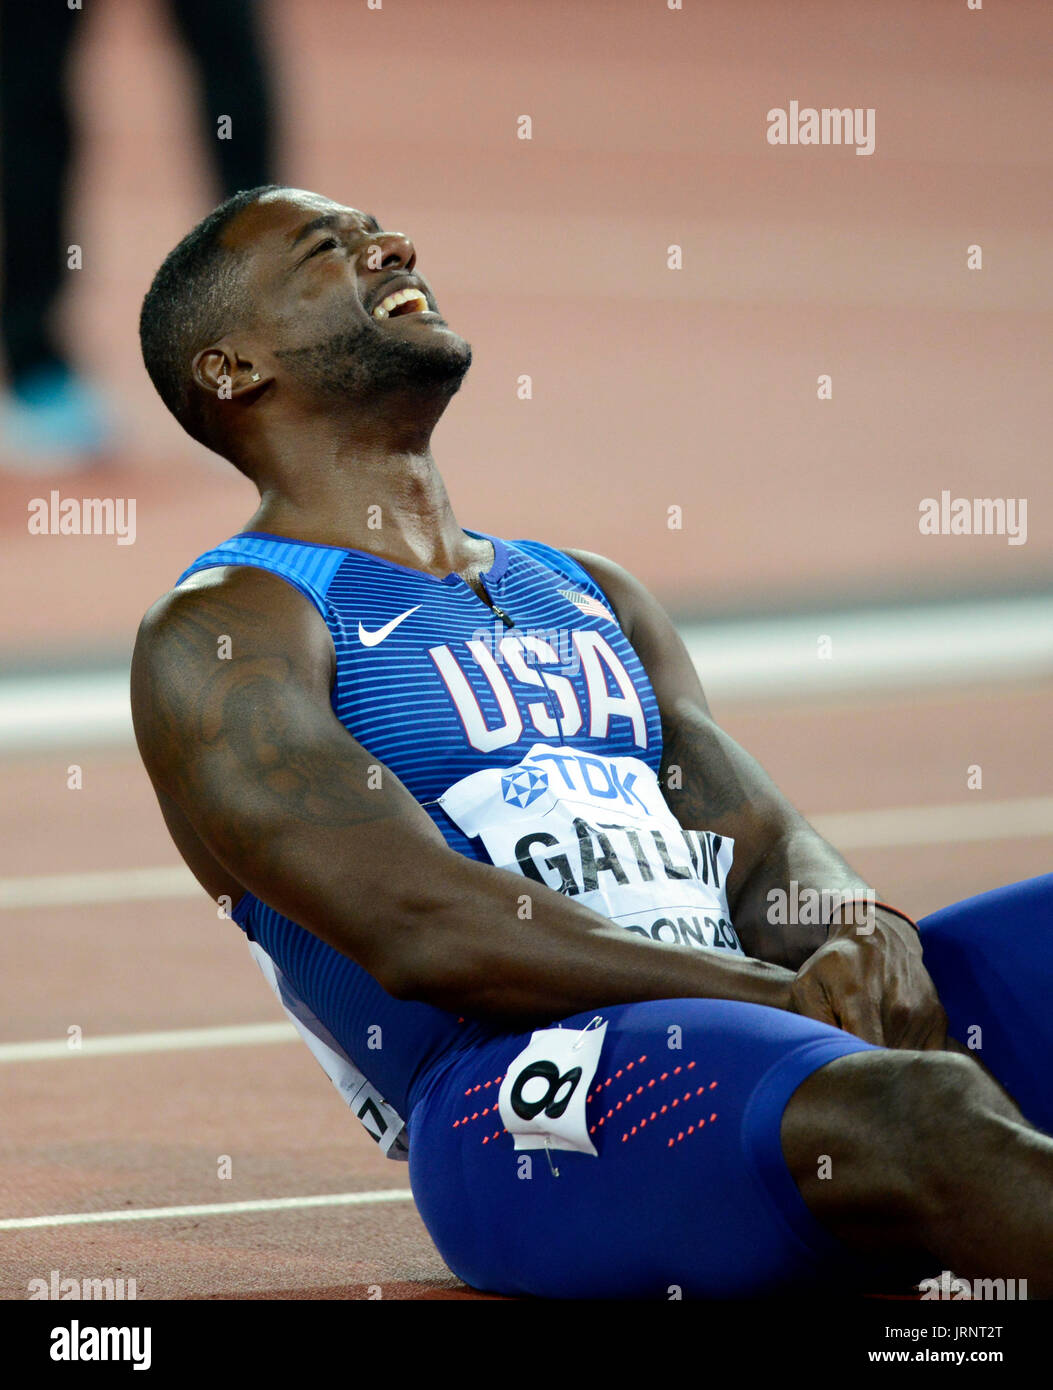 London, UK. 05th Aug, 2017. Justin Gatlin (USA) wins the competition over the favourite Usain Bolt (JAM) at the IAAF Athletics World Championships - London 2017 Credit: Mariano Garcia/Alamy Live News Stock Photo